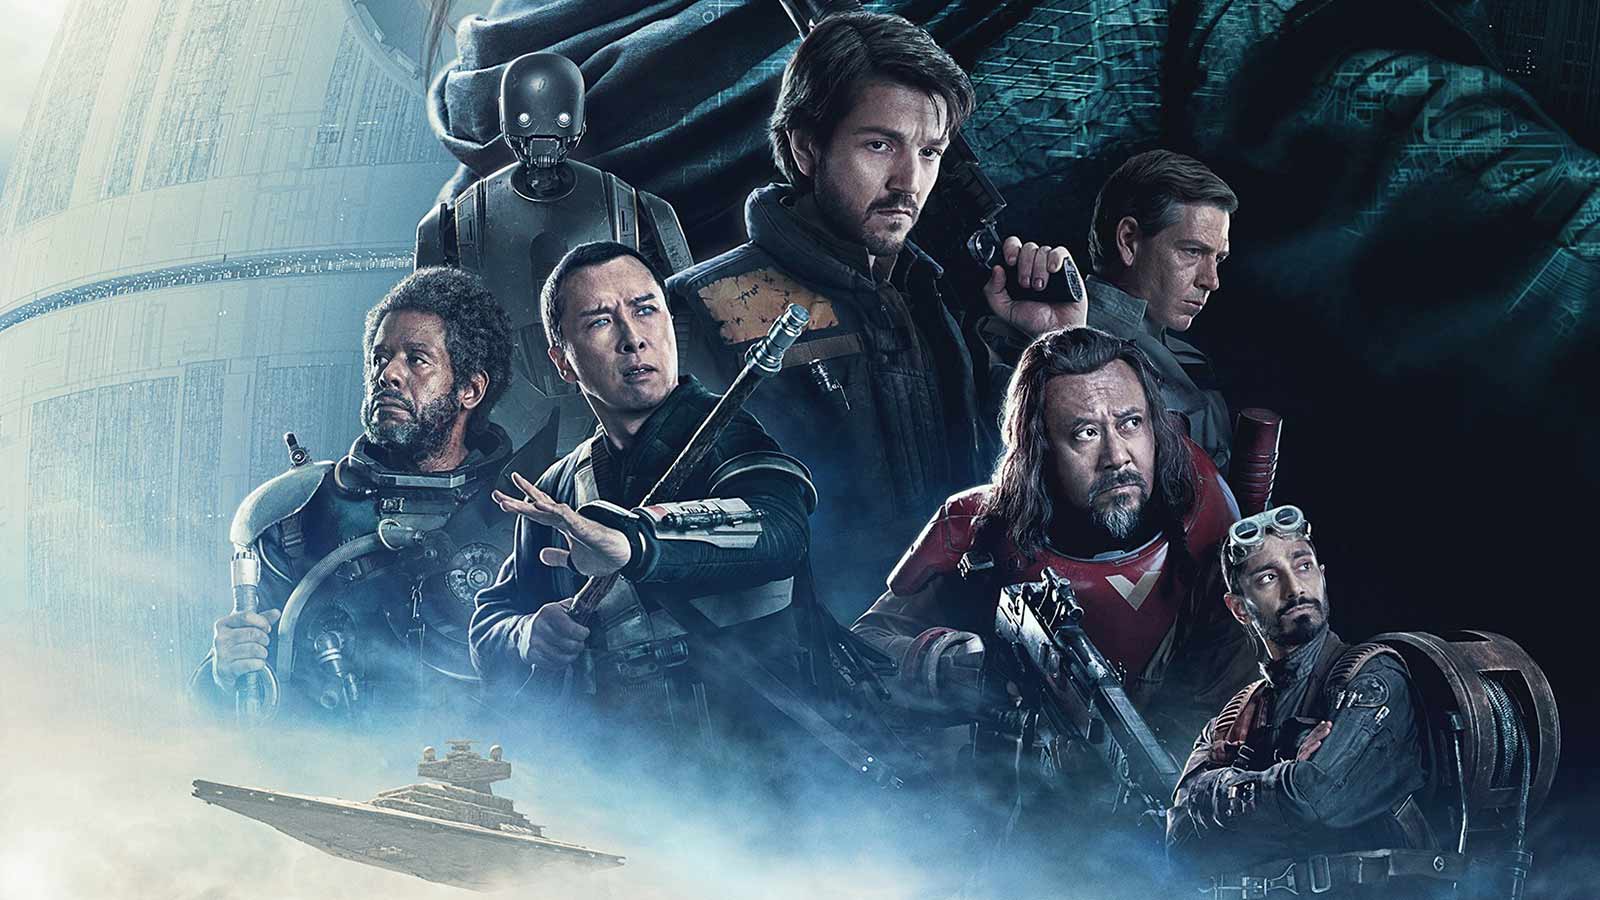 Rogue One-A Star Wars Story